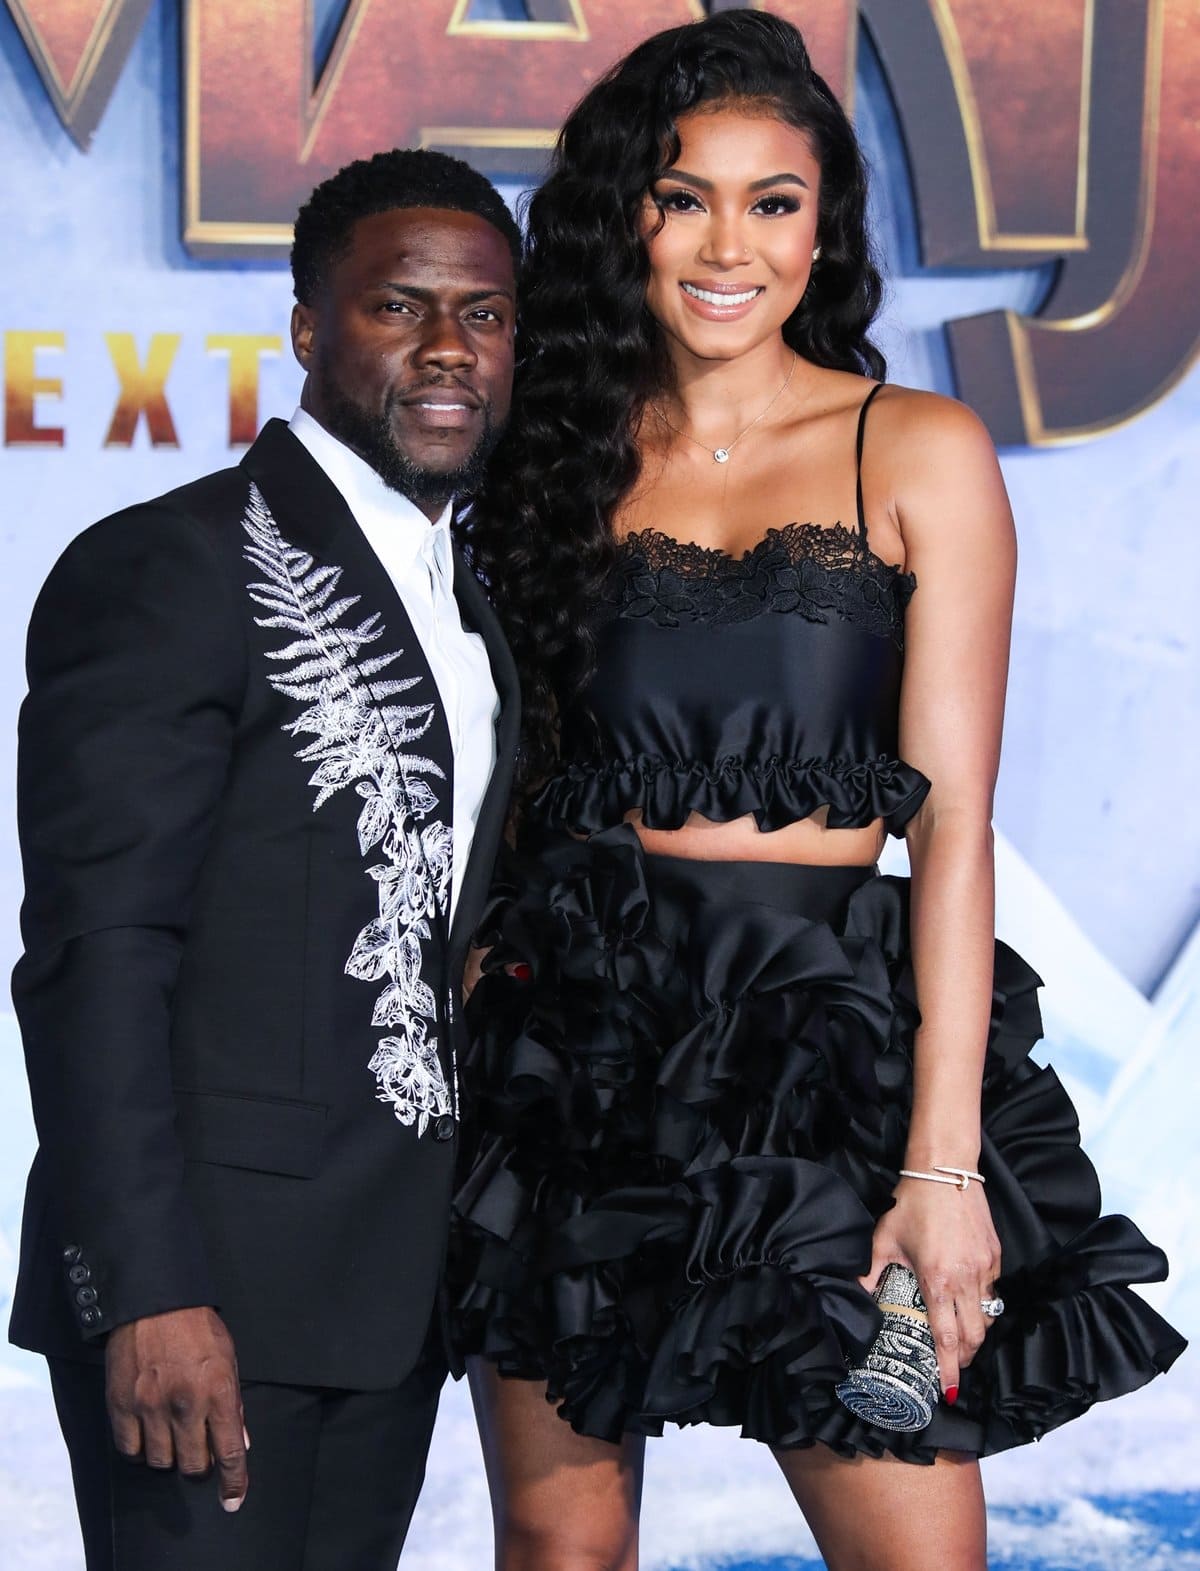 Kevin Hart and his much taller wife Eniko Parrish